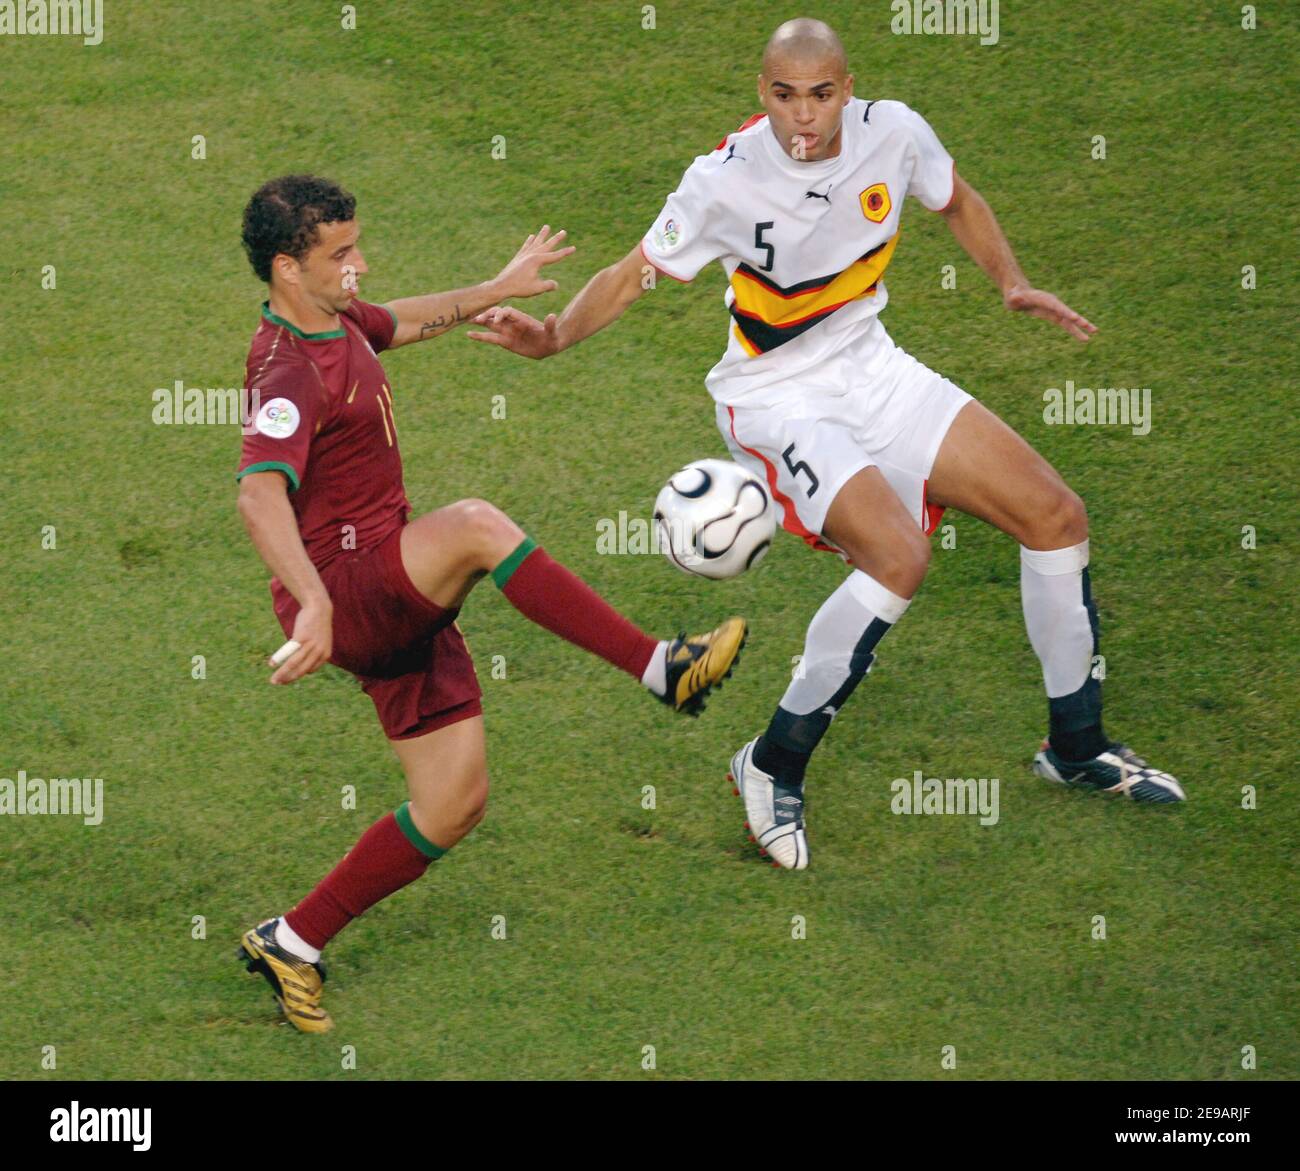 Portugal's Simao Sabrosa and Angola's Kali in action during the World Cup 2006, Group D, Angola vs Portugal in Cologne, Germany on June 11, 2006. Portugal won 1-0. Photo by Gouhier-Hahn-Orban/Cameleon/ABACAPRESS.COM Stock Photo